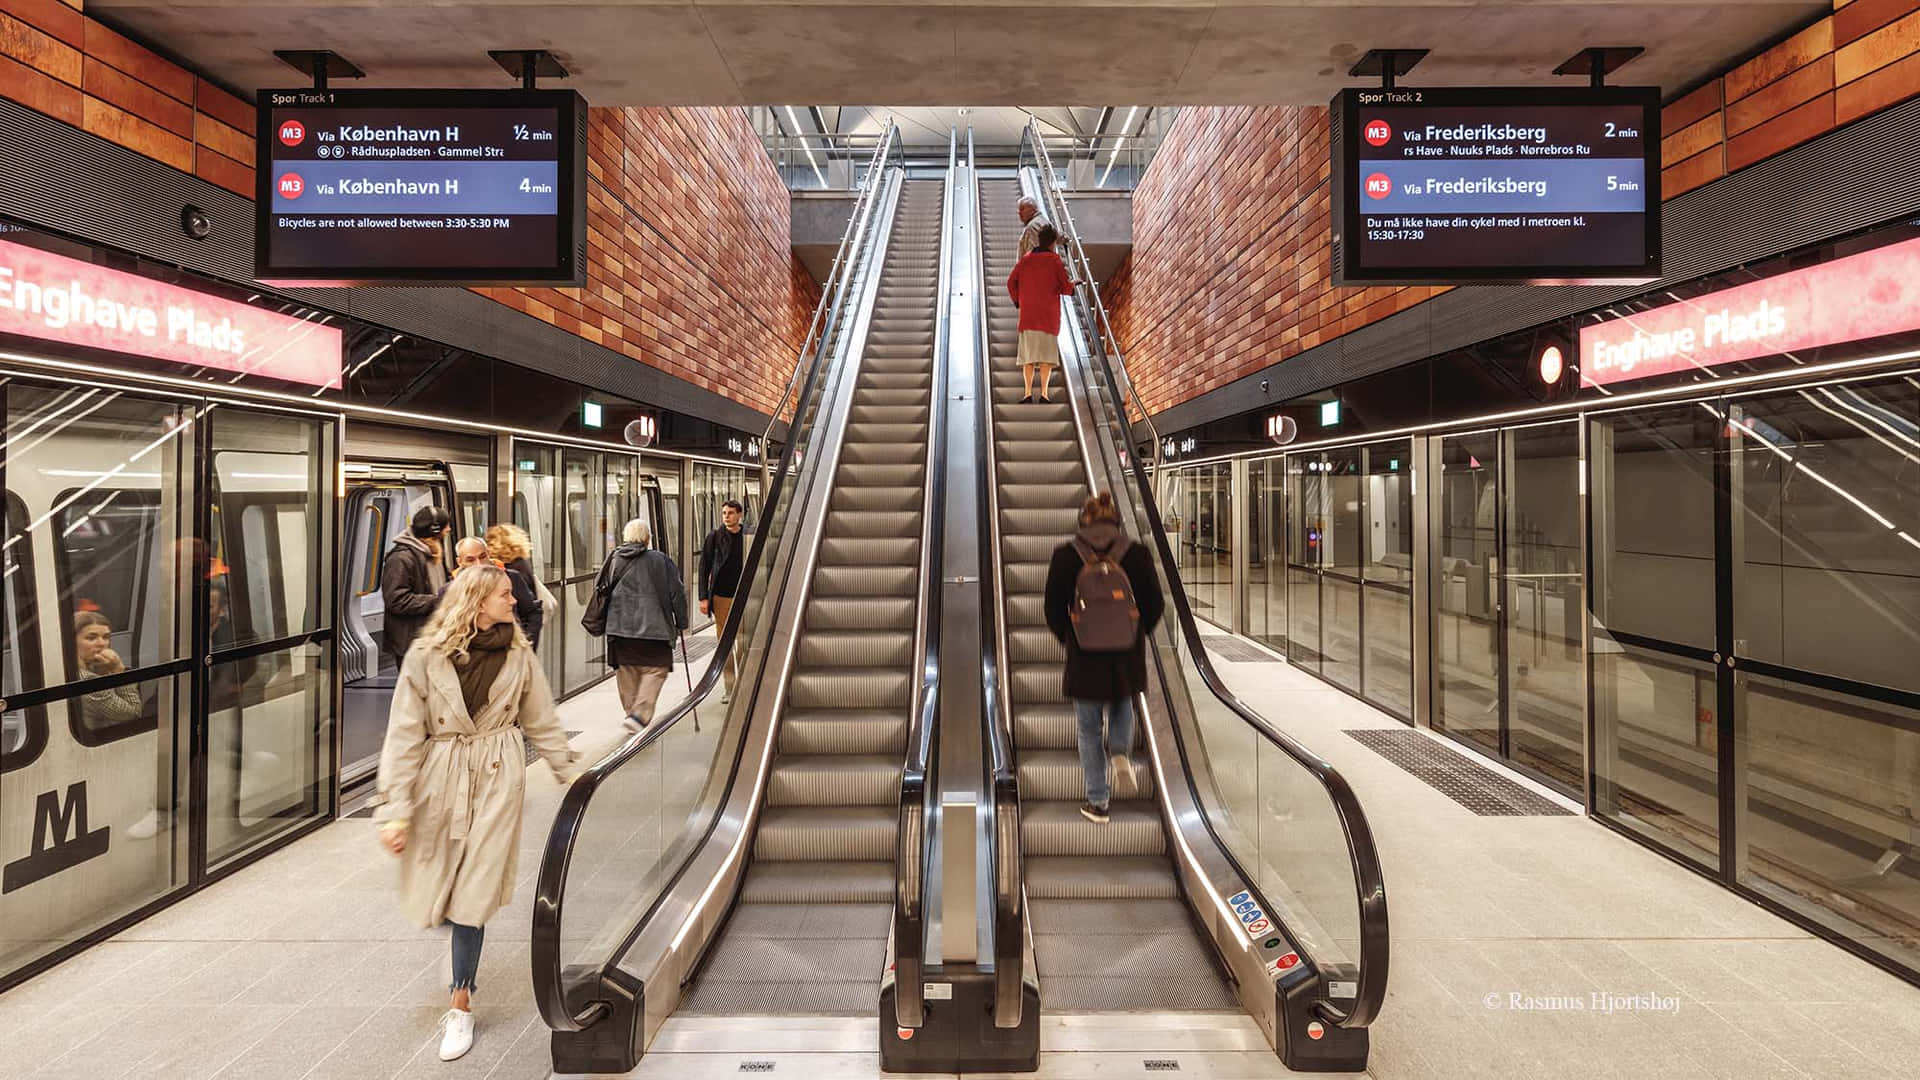 A Subway Station With Escalators And People Walking Down Them